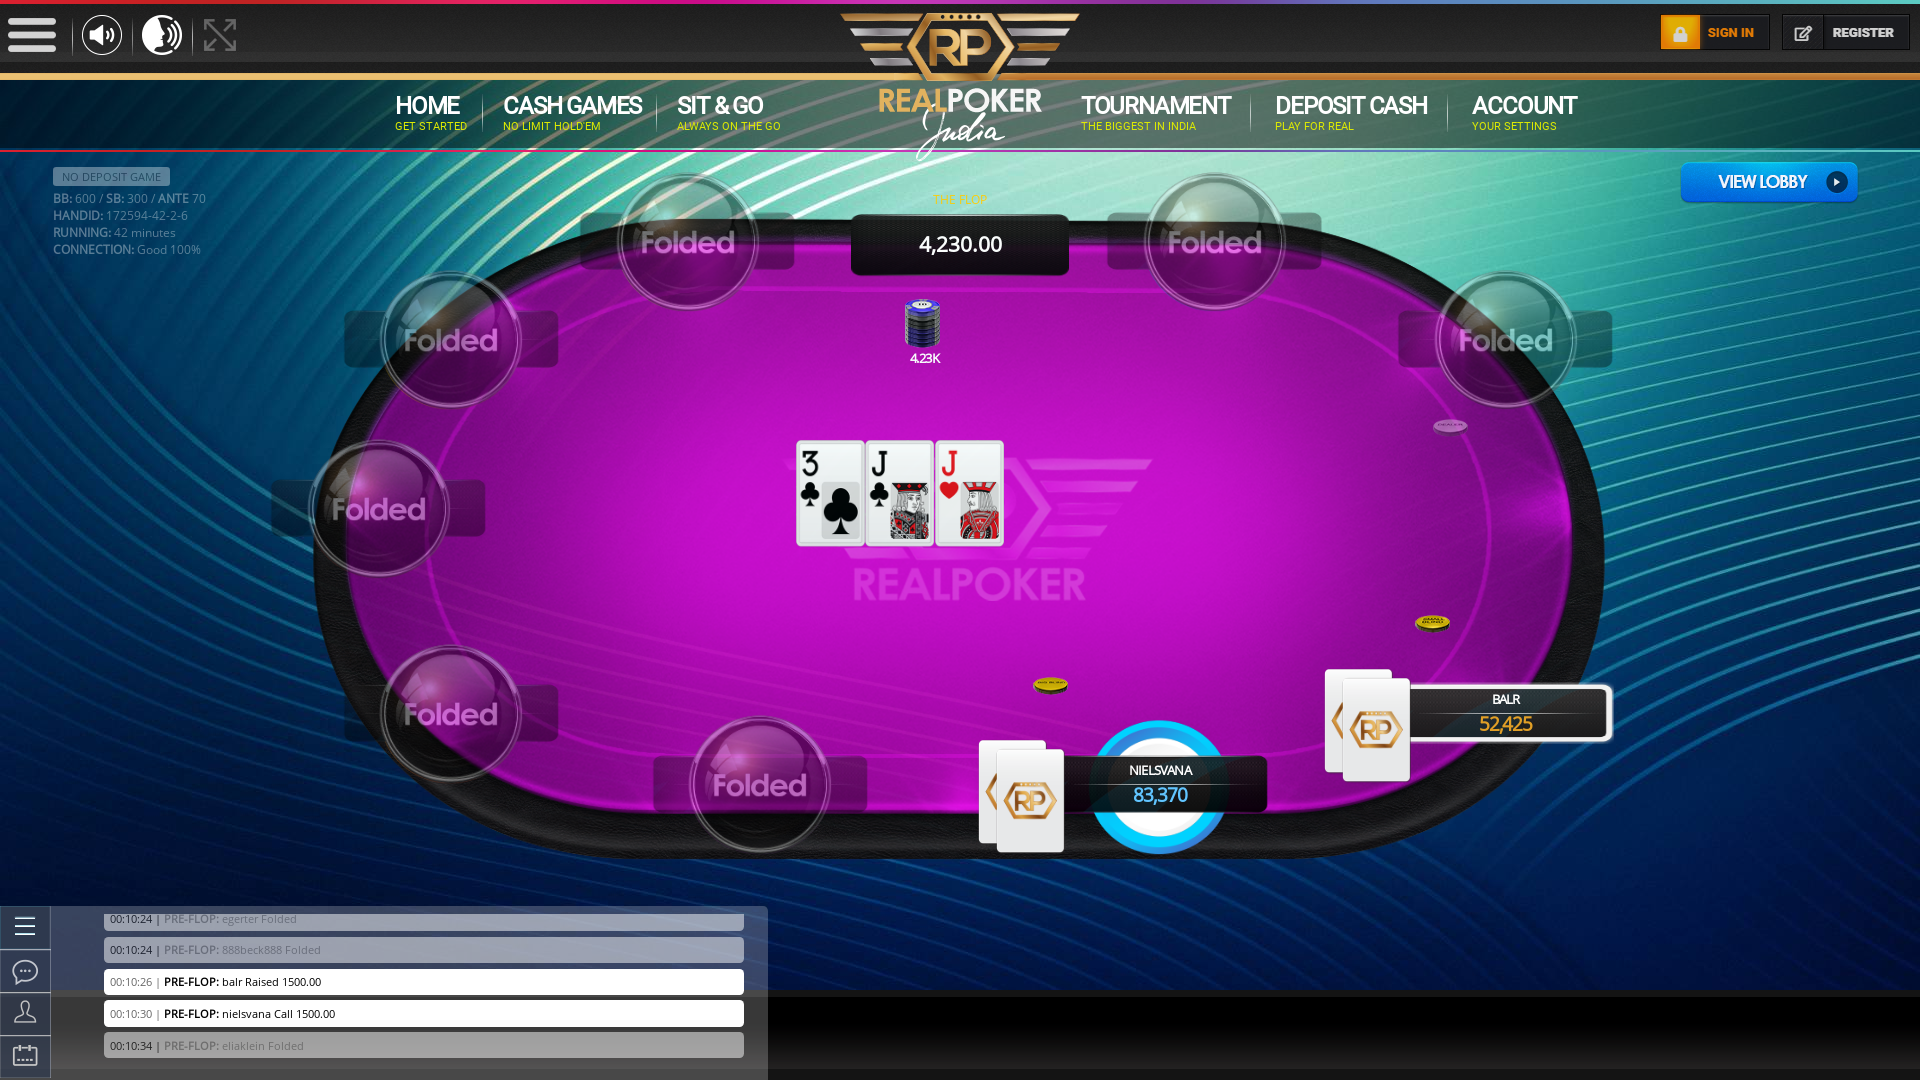 Real poker 10 player table in the 42nd minute of the match